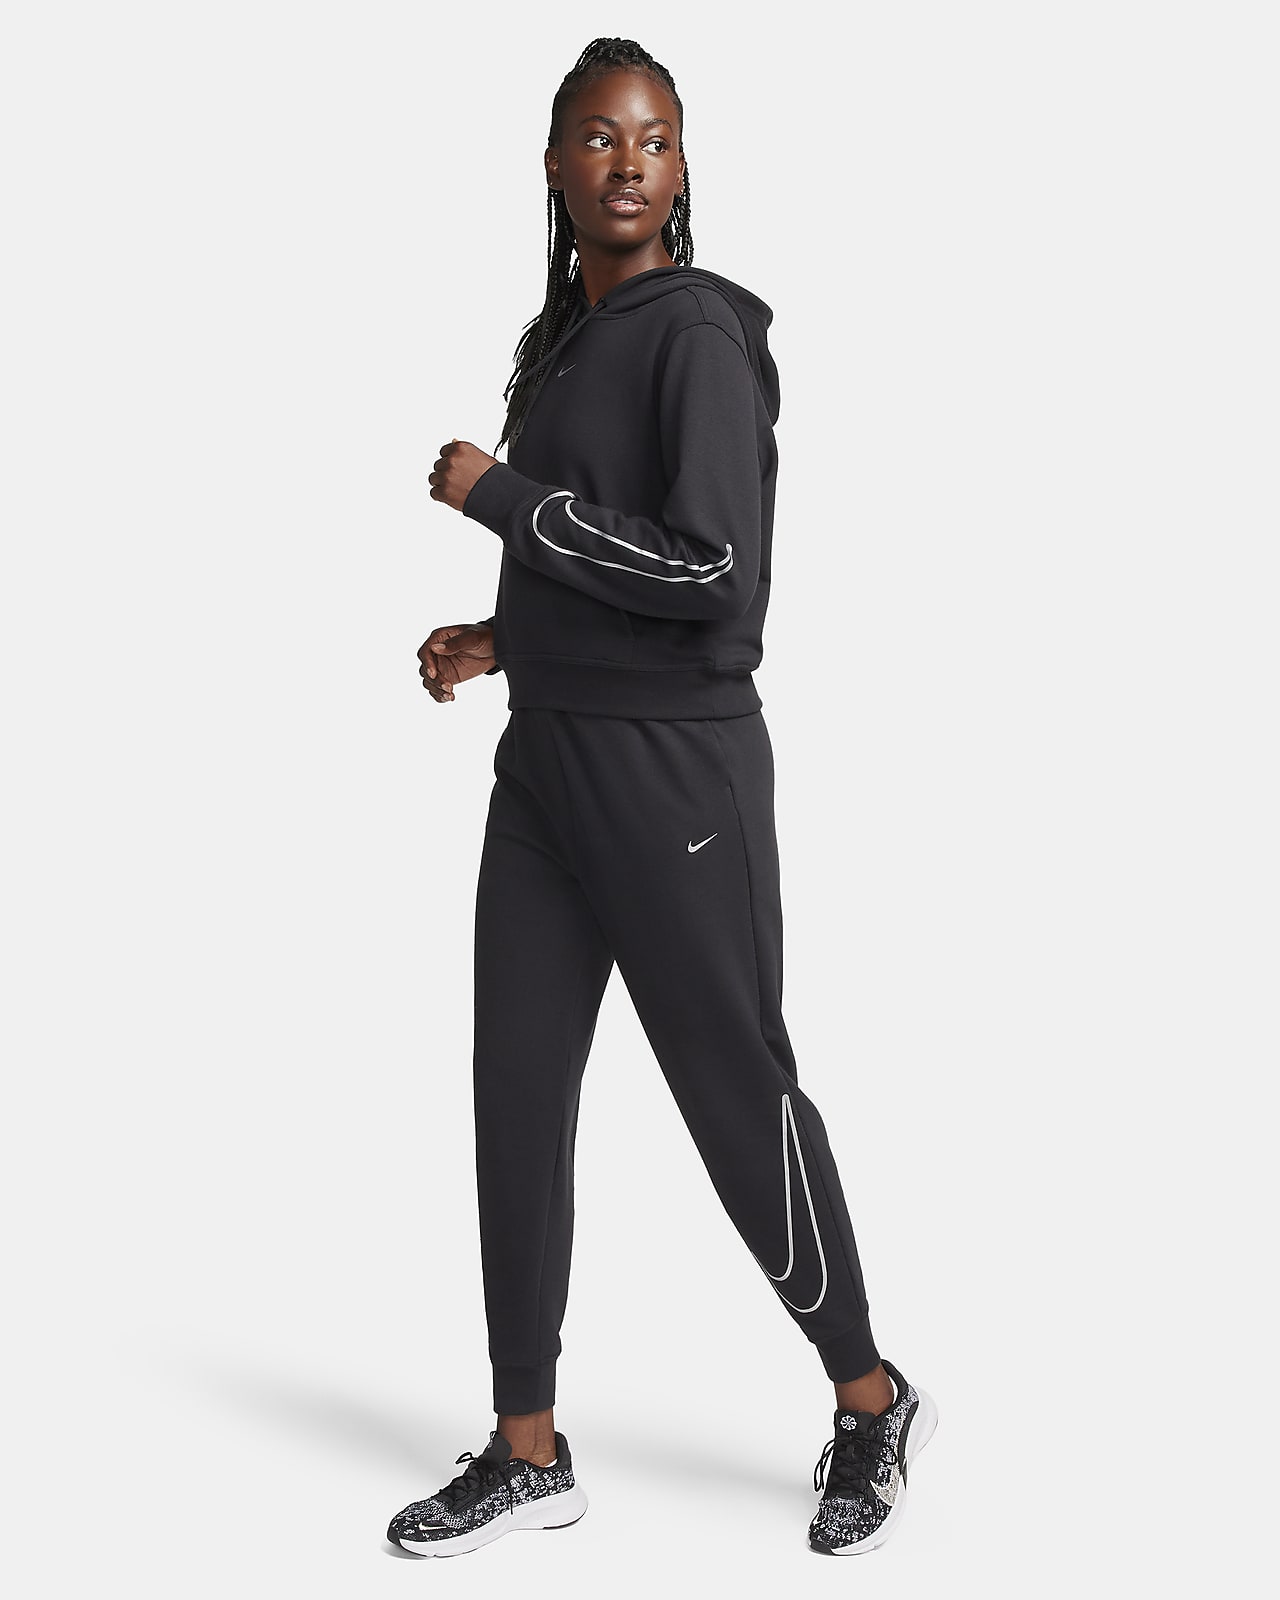 Nike Dri-FIT One Women's French Terry Graphic Hoodie.